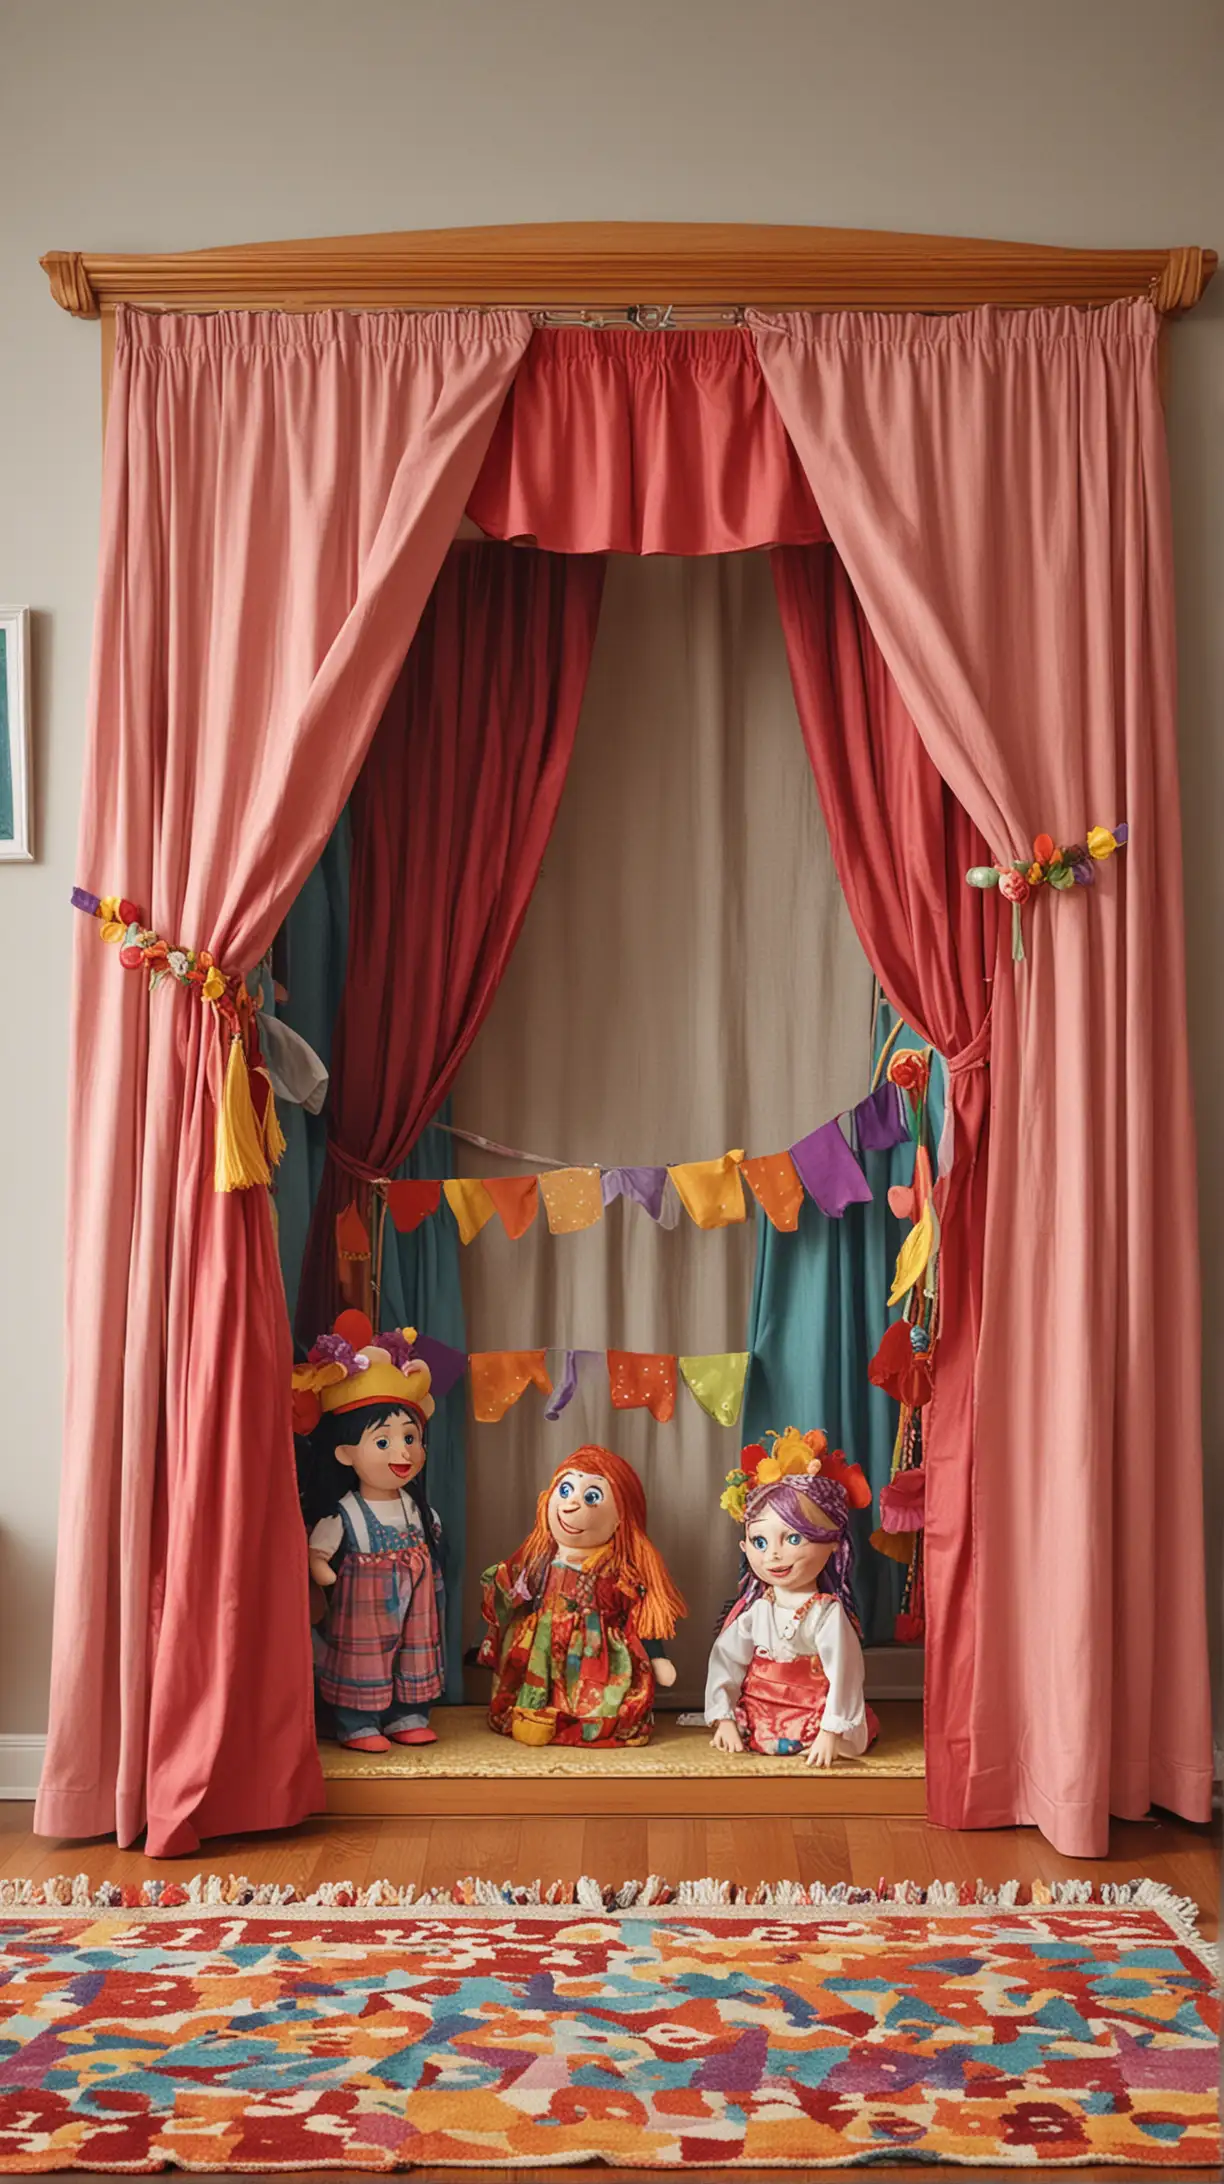 Mini puppet theater setup in a living room, children performing with puppets, colorful curtains, imaginative play.